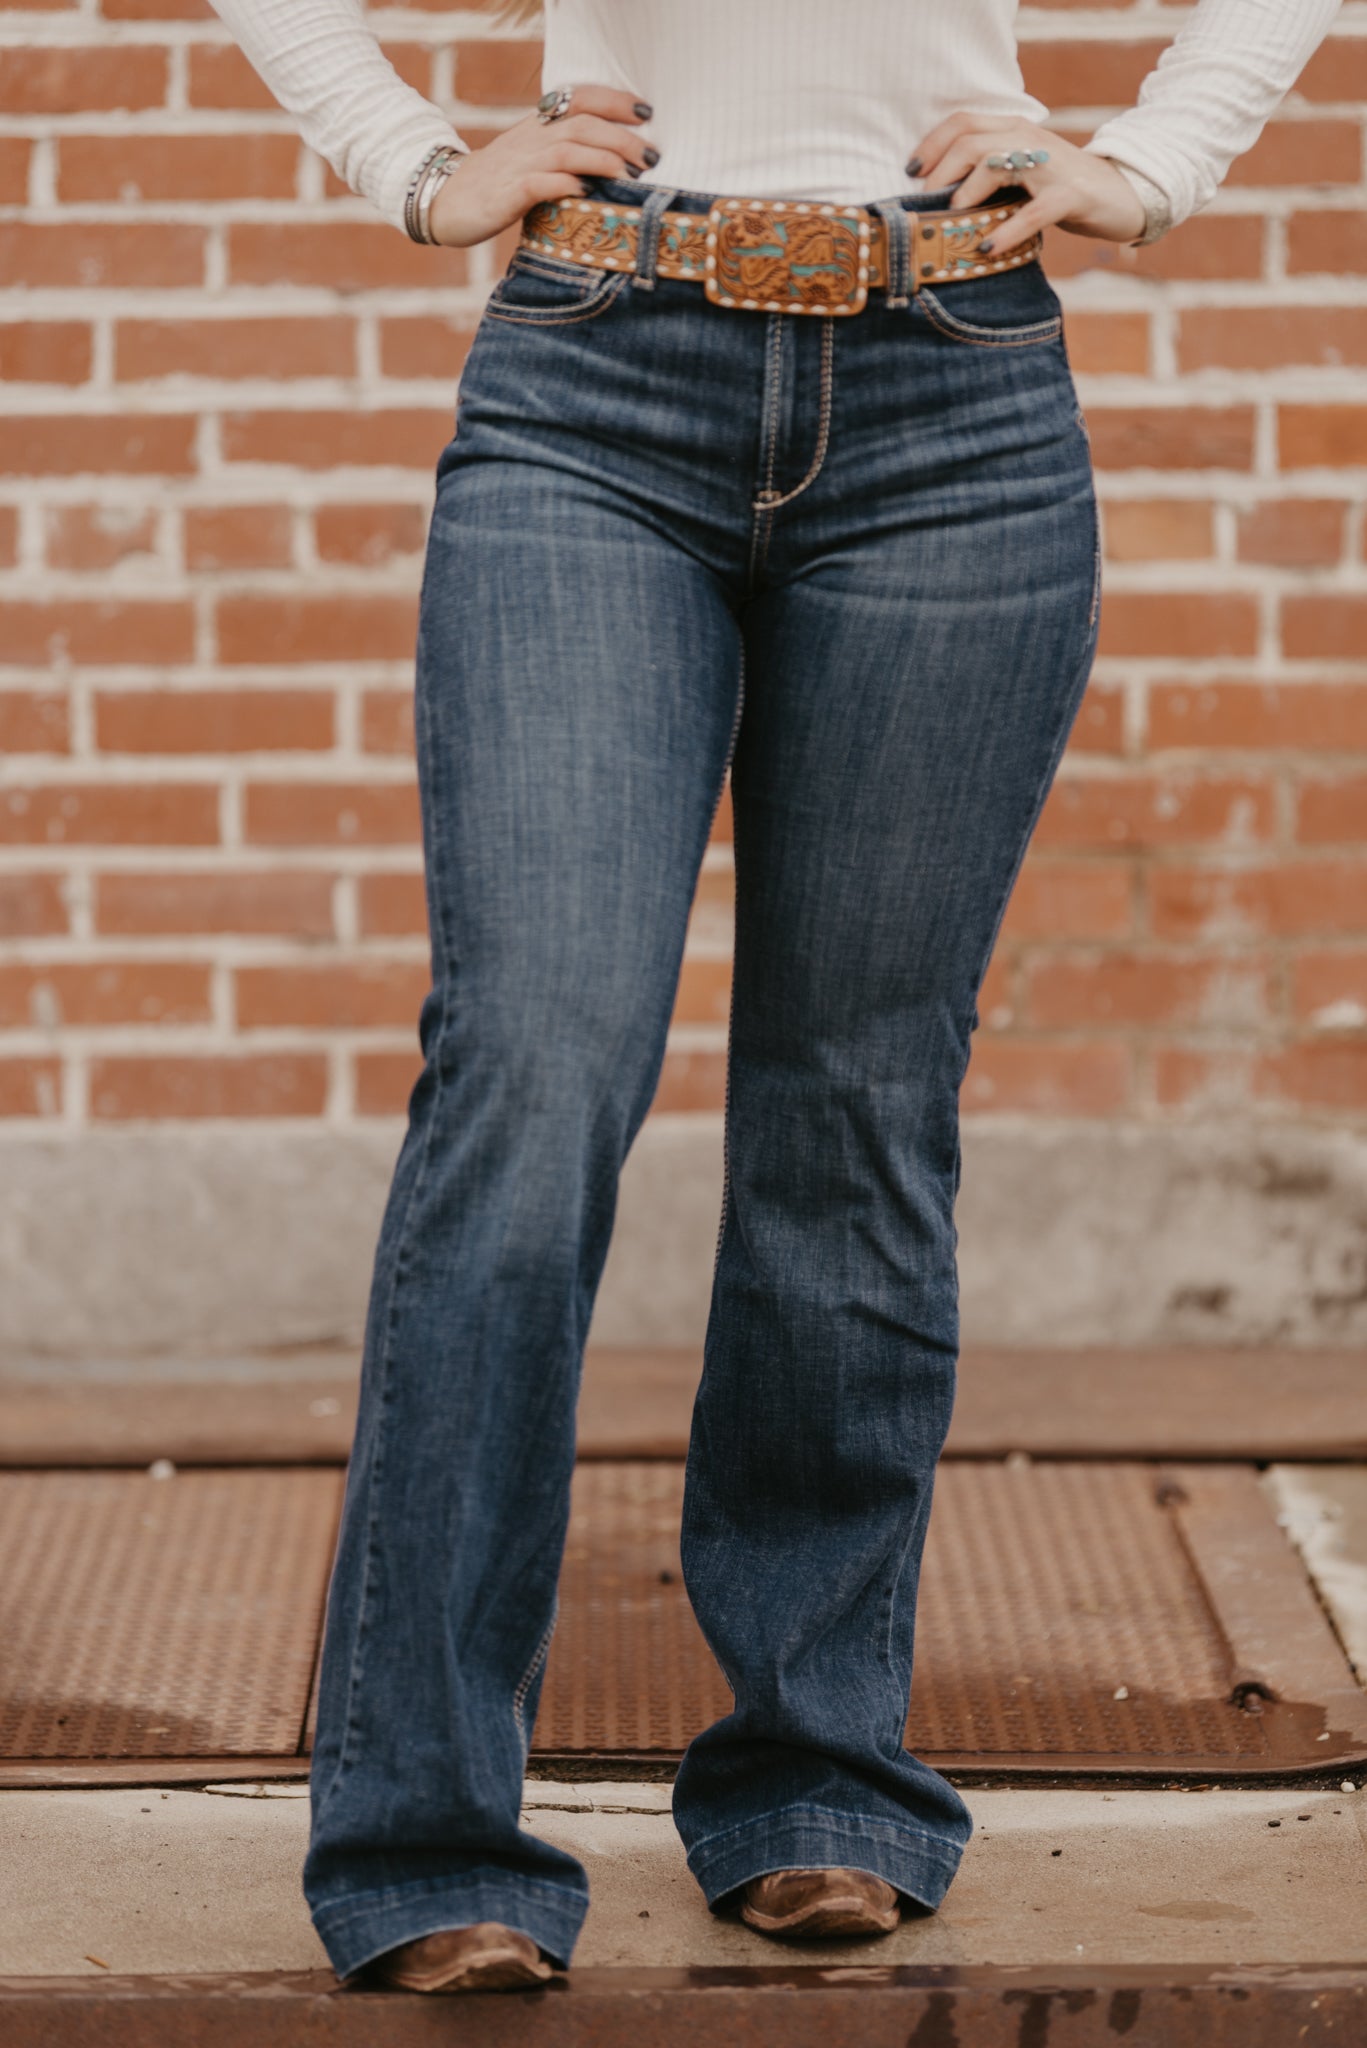 The Naz Trouser by Ariat